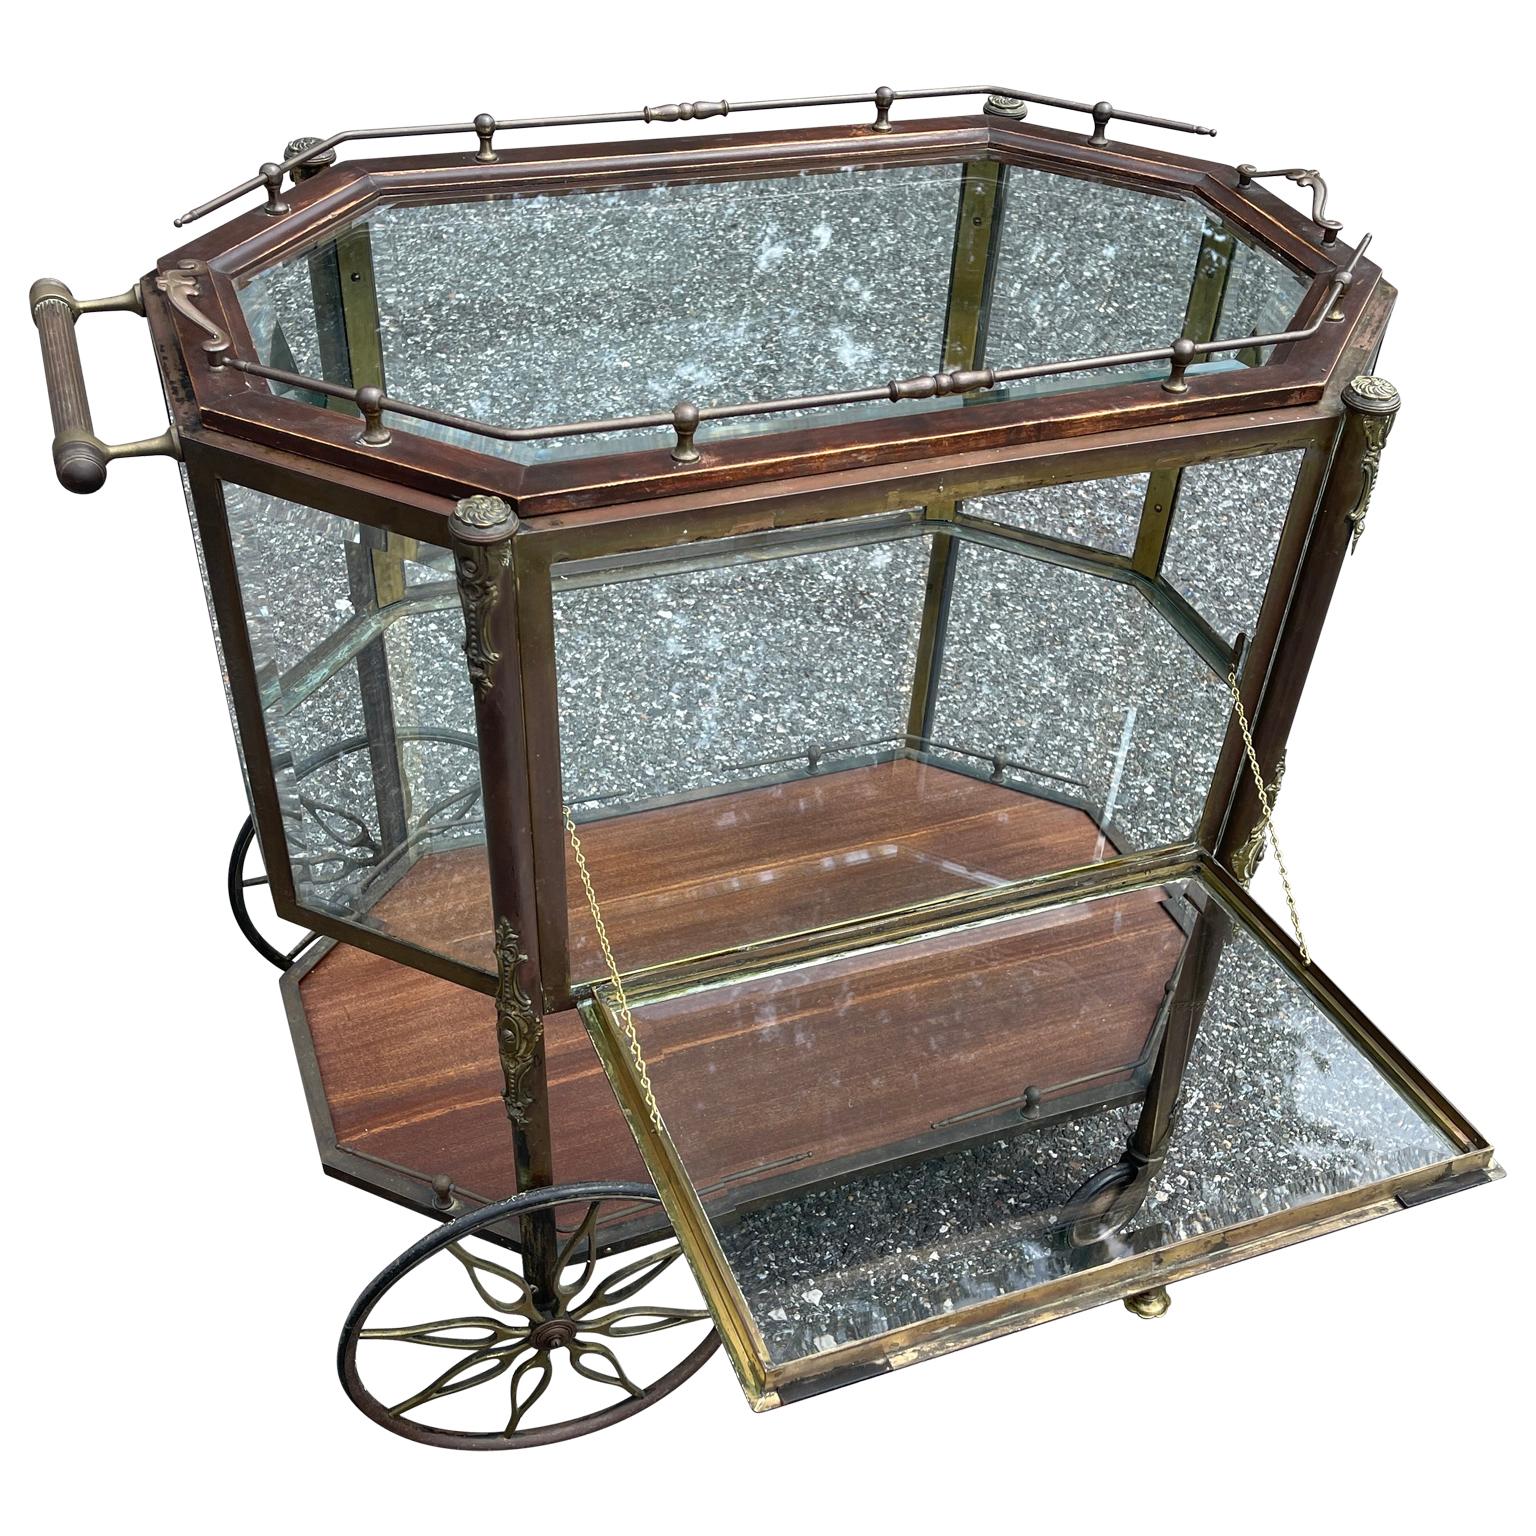 Mid-Century Modern dessert or pastry cart, France circa 1940-1950's.
Just feast your eyes on this beauty. The wooden and brass pastry or bar trolley stands proudly on it's original front caster wheels accented by large trolley back wheels with